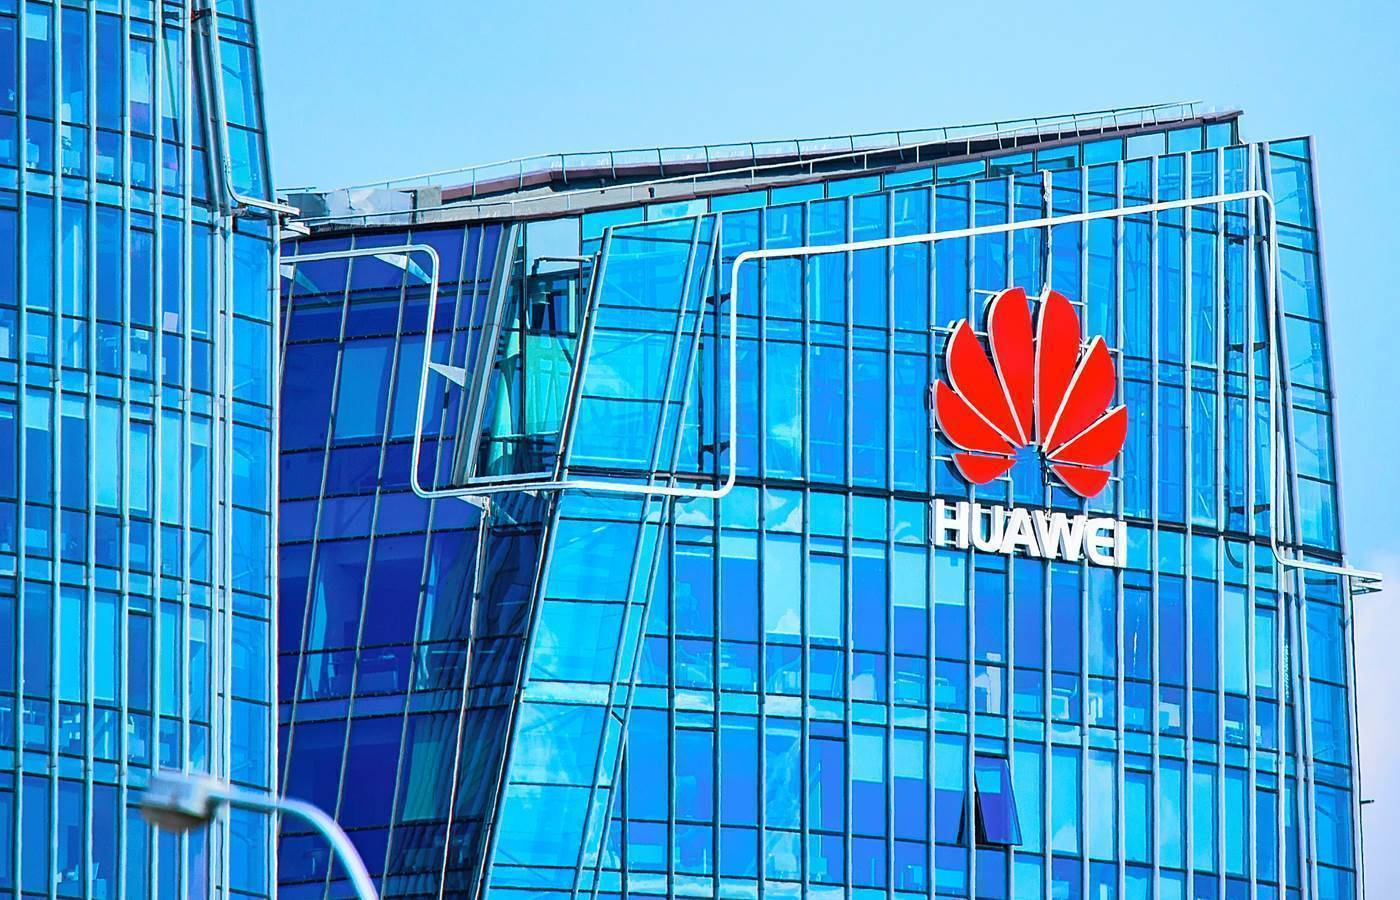 Huawei says it earned patent revenues of US0 million last year